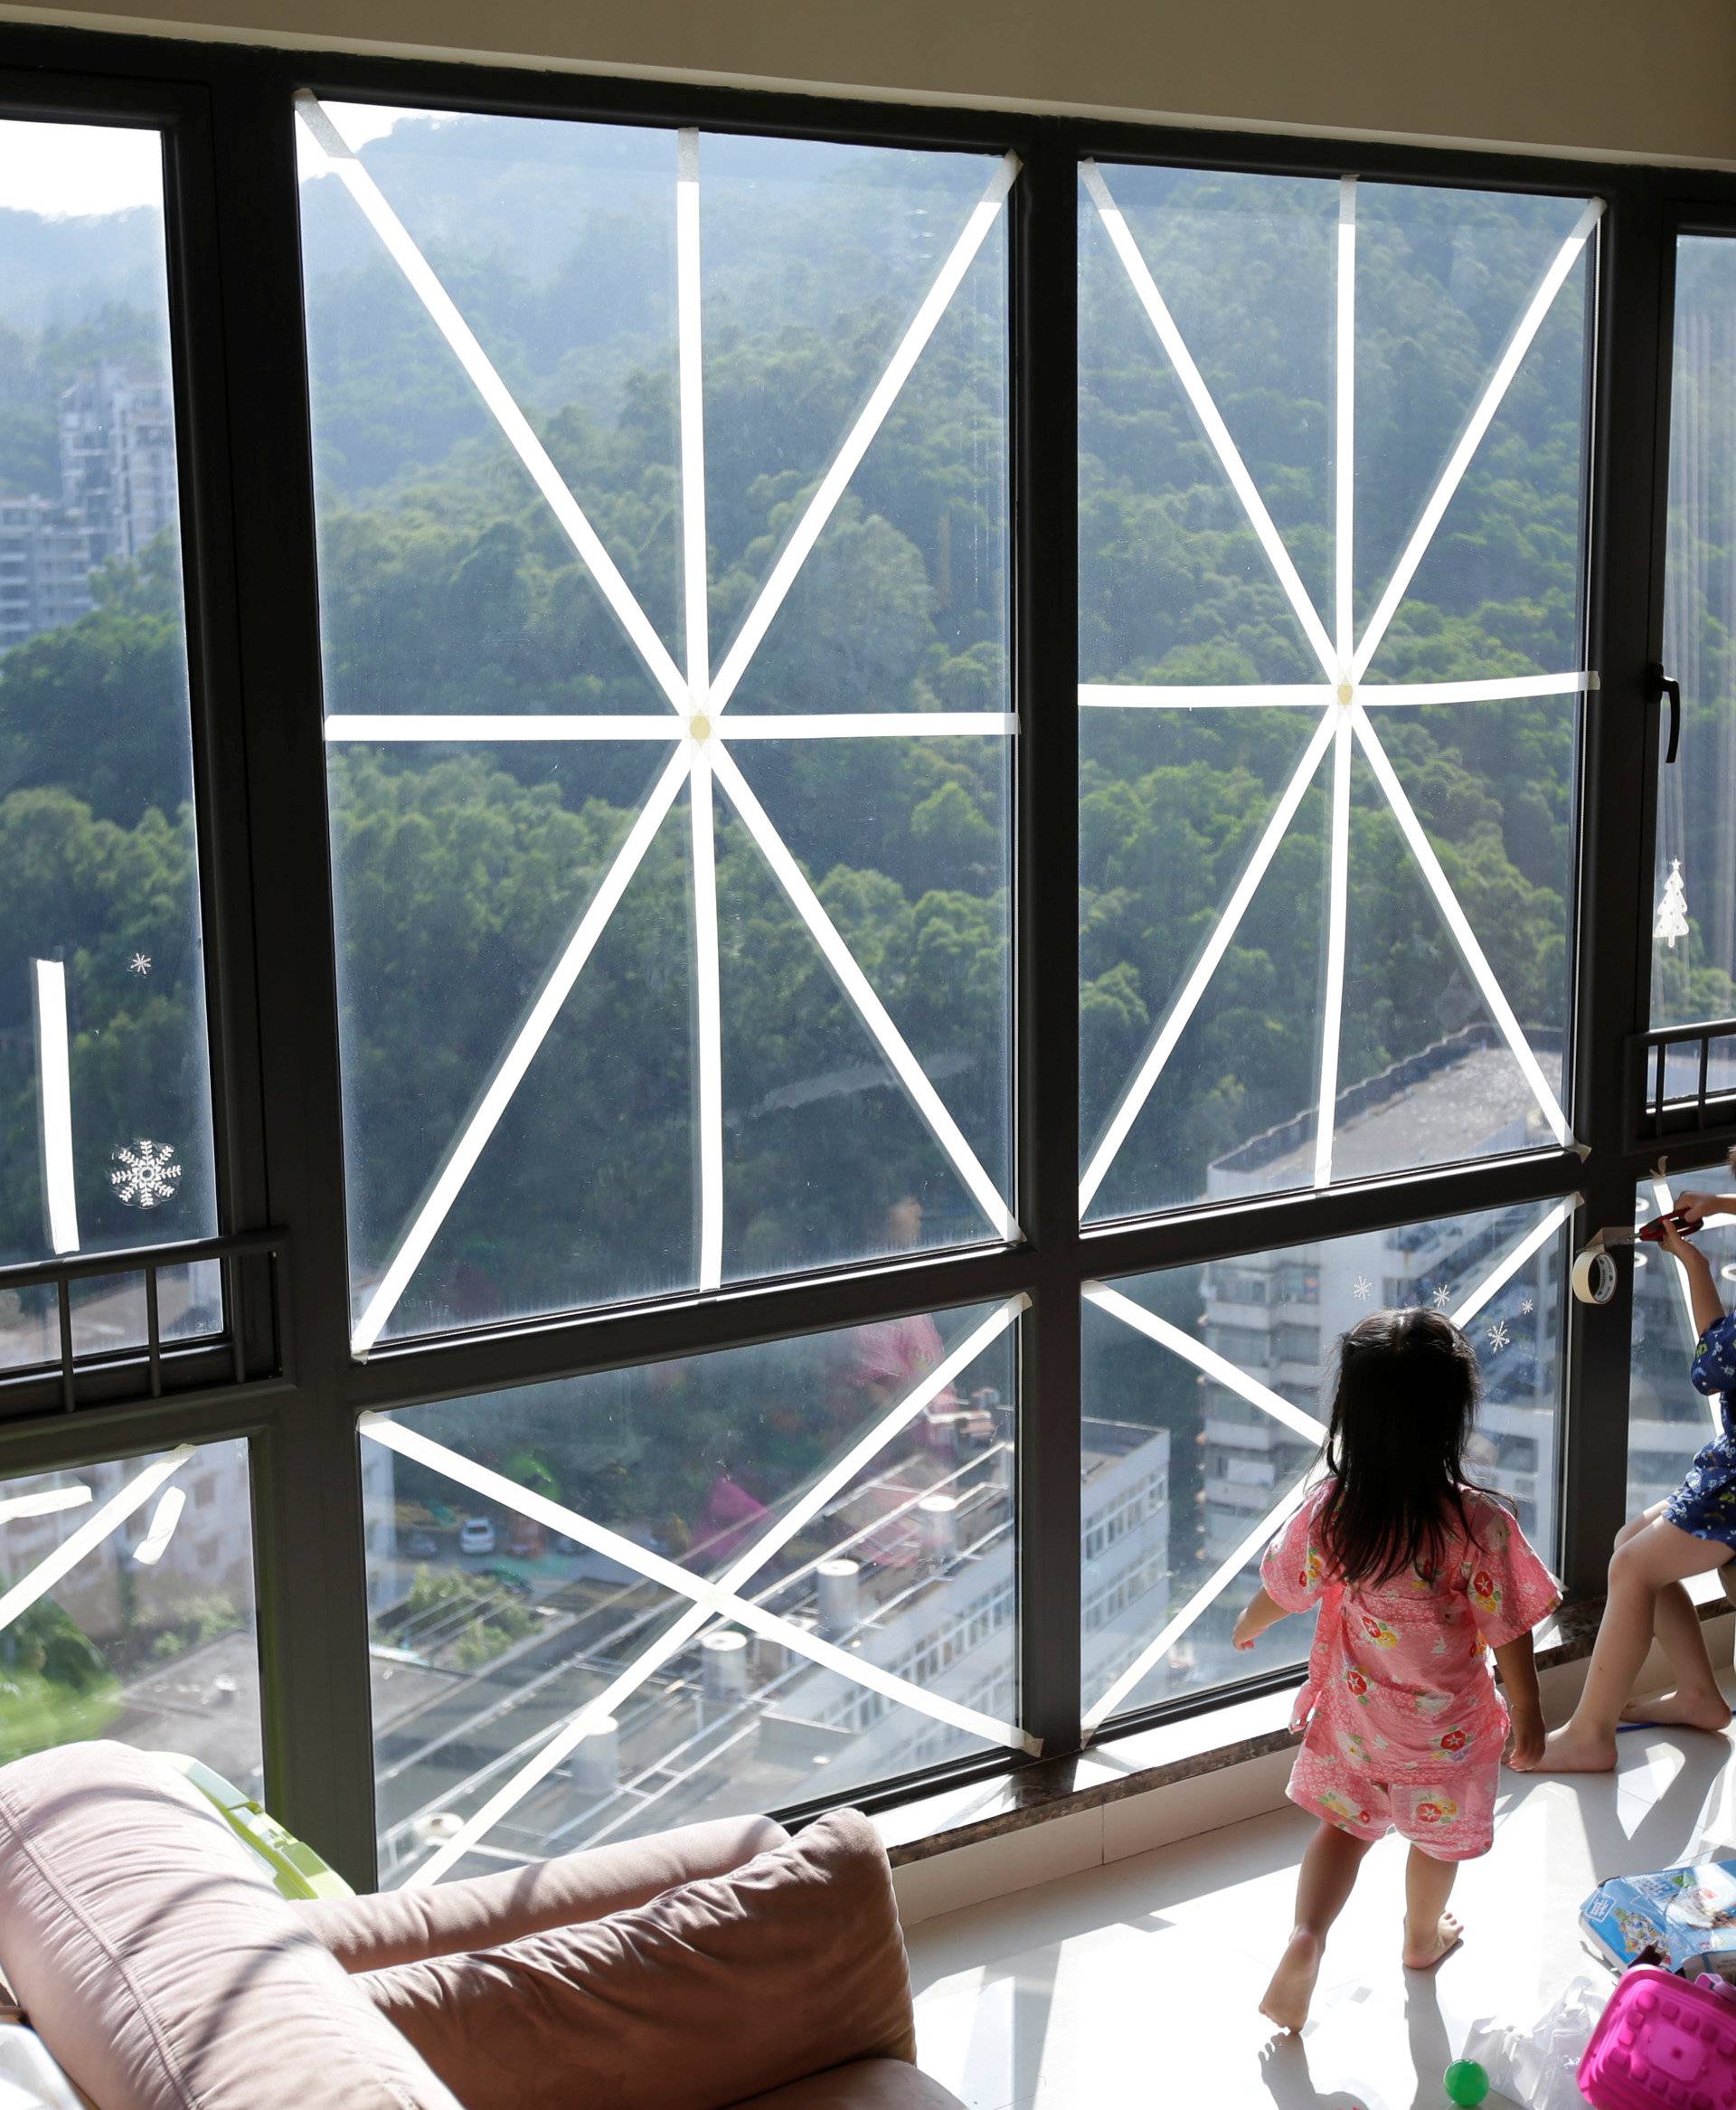 A brother and his sister play at a living room with windows taped in preparation for Typhoon Mangkhut in Shenzhen